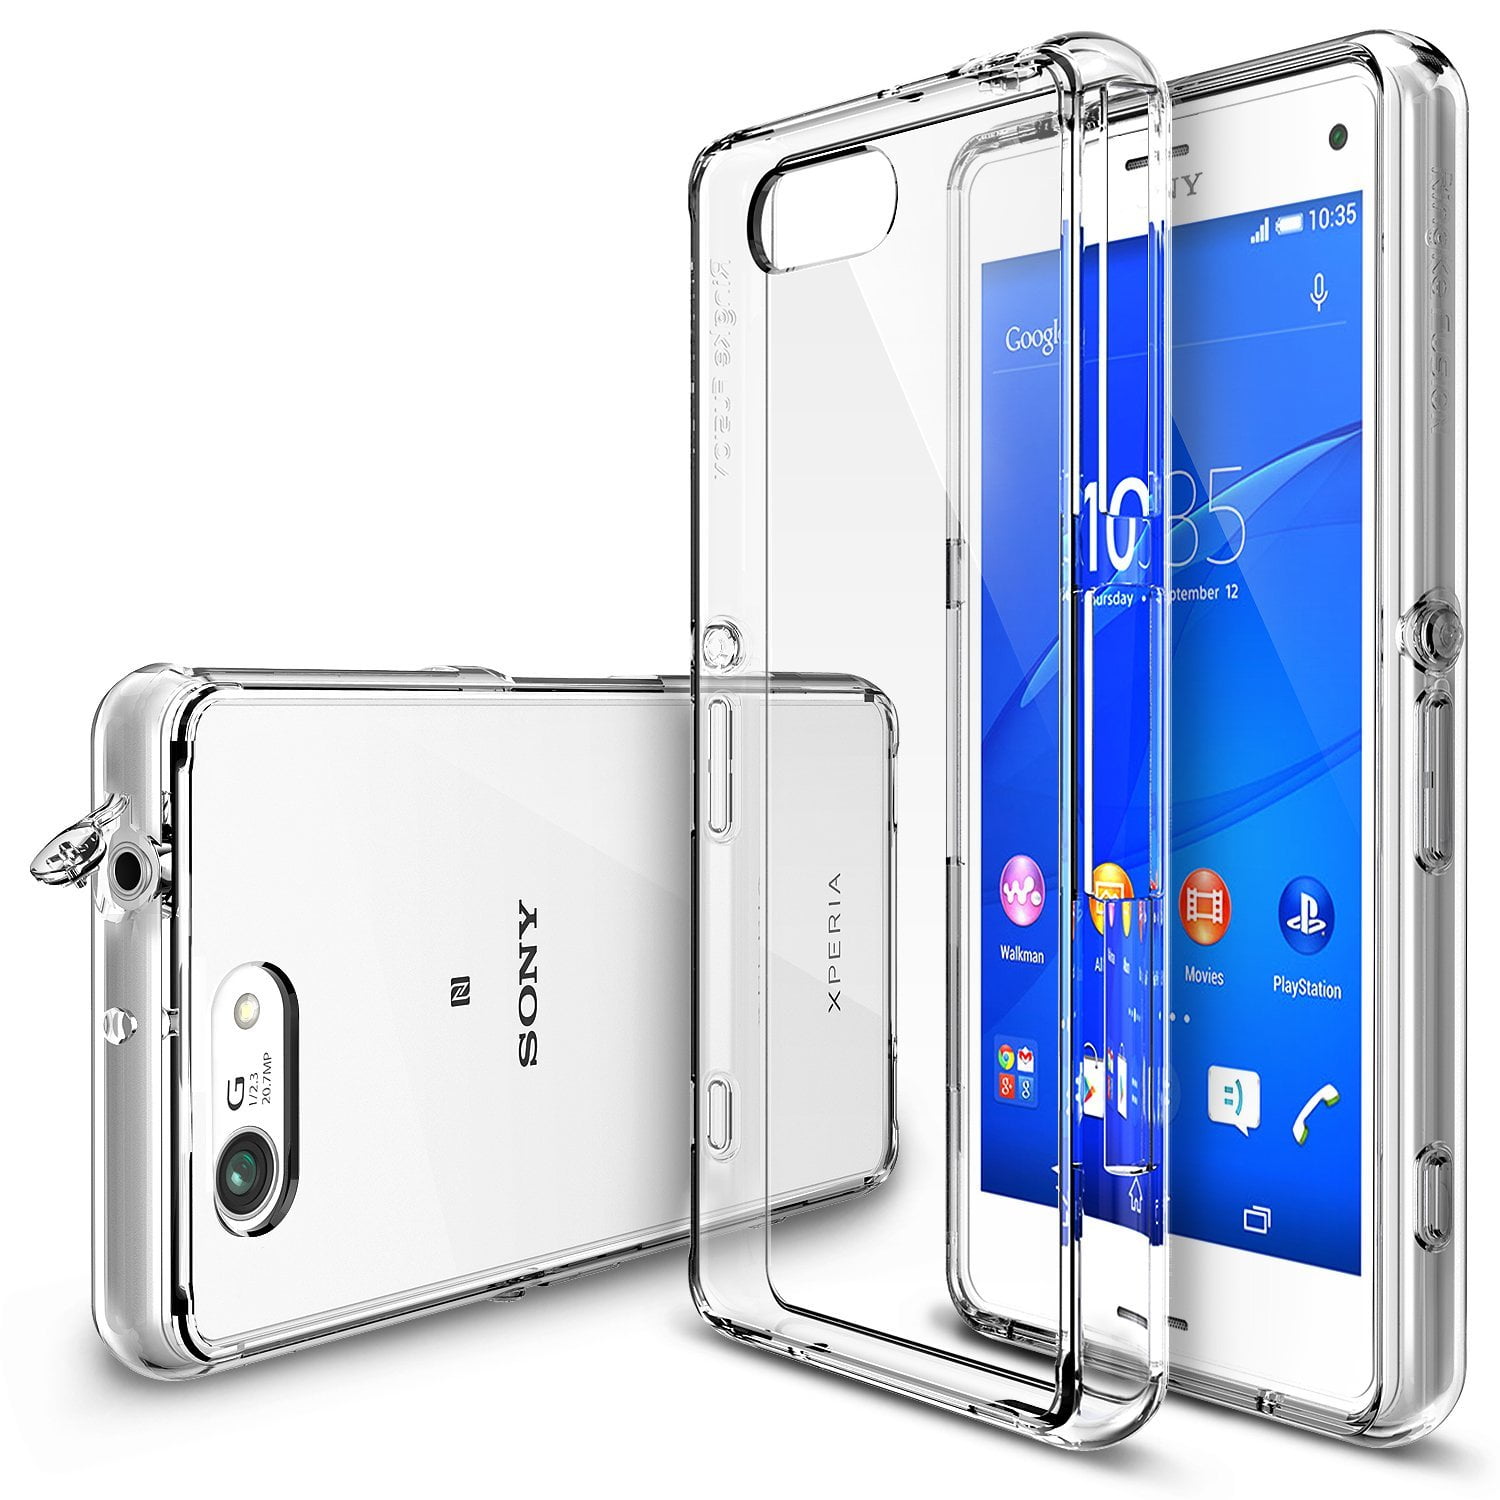 Verzakking Whitney Subjectief Ringke Fusion Case Compatible with Sony Xperia Z3 Compact, Transparent PC  Back TPU Bumper Drop Protection Phone Cover - Clear - Walmart.com